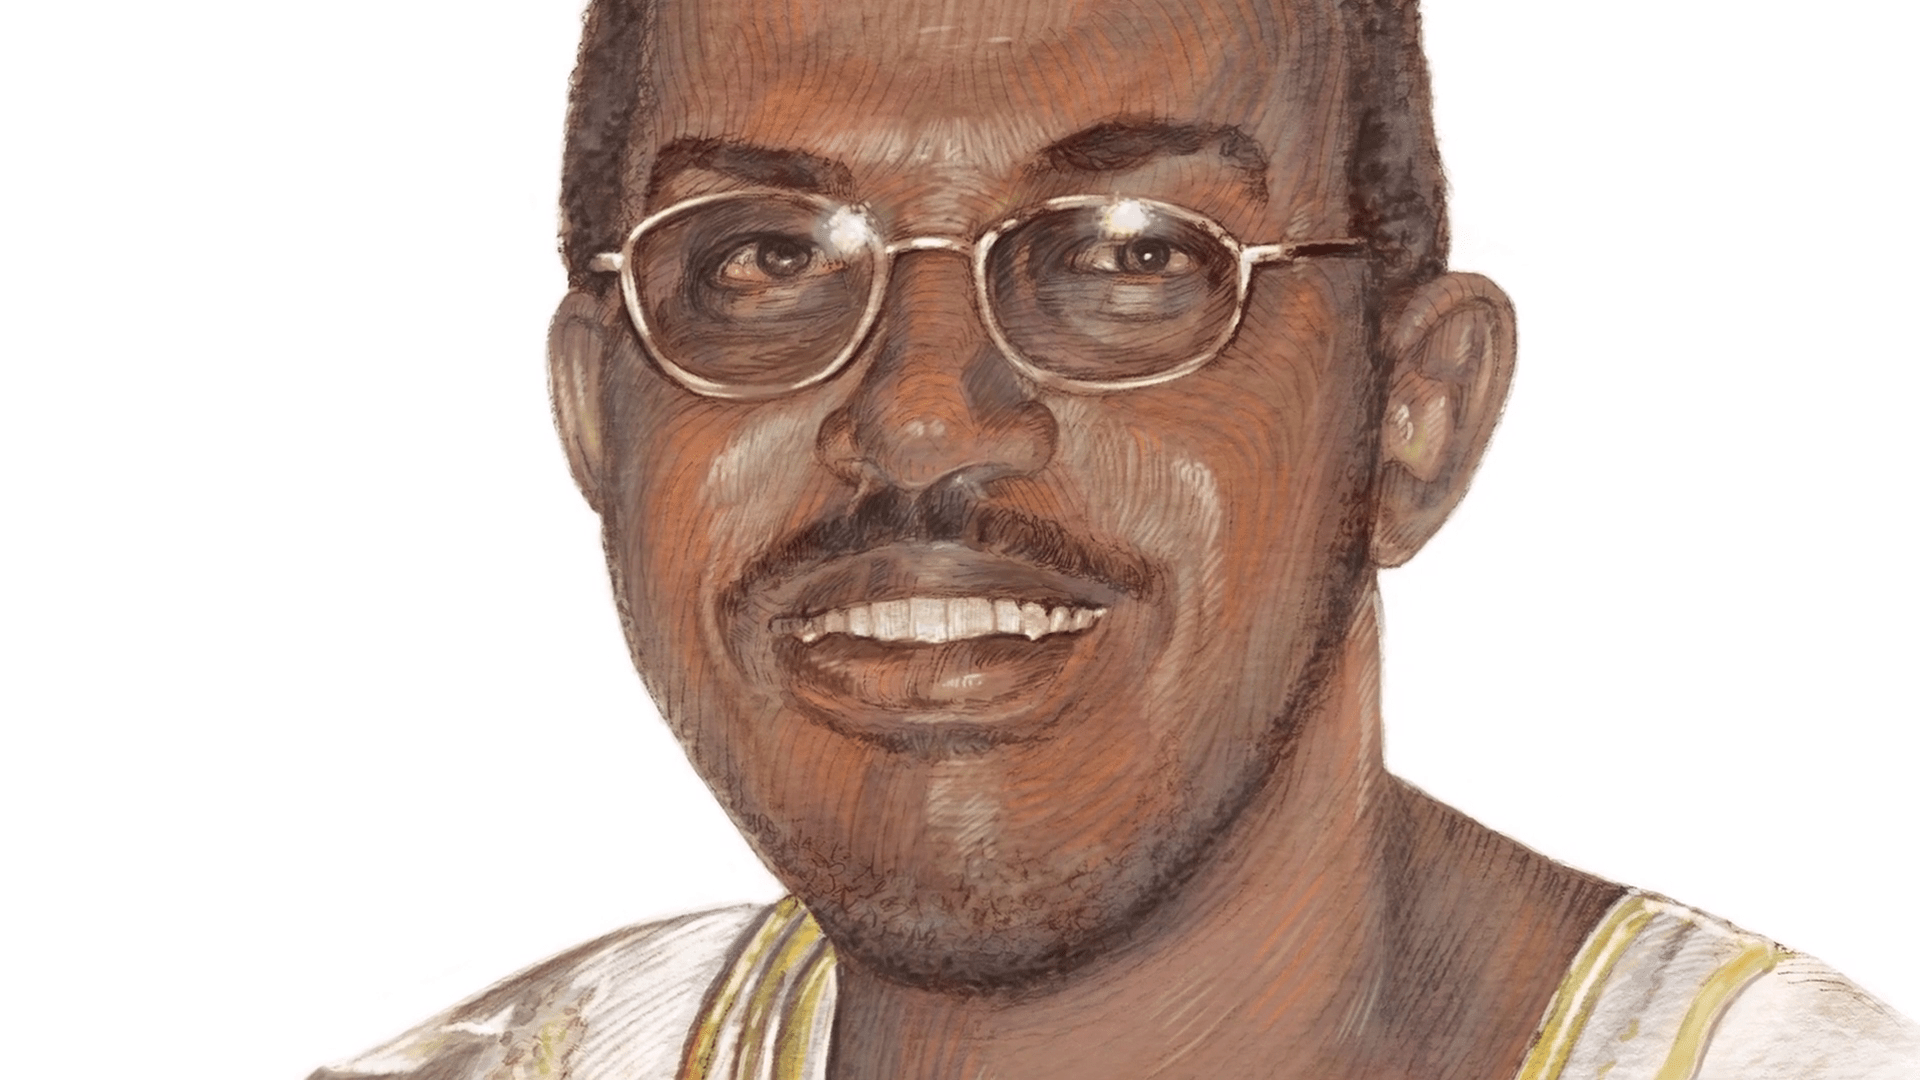 Abdiwelli Ahmed was taught that Islam was in his blood. But in 1993, he began to question Islam and compare the Quran with the Bible.